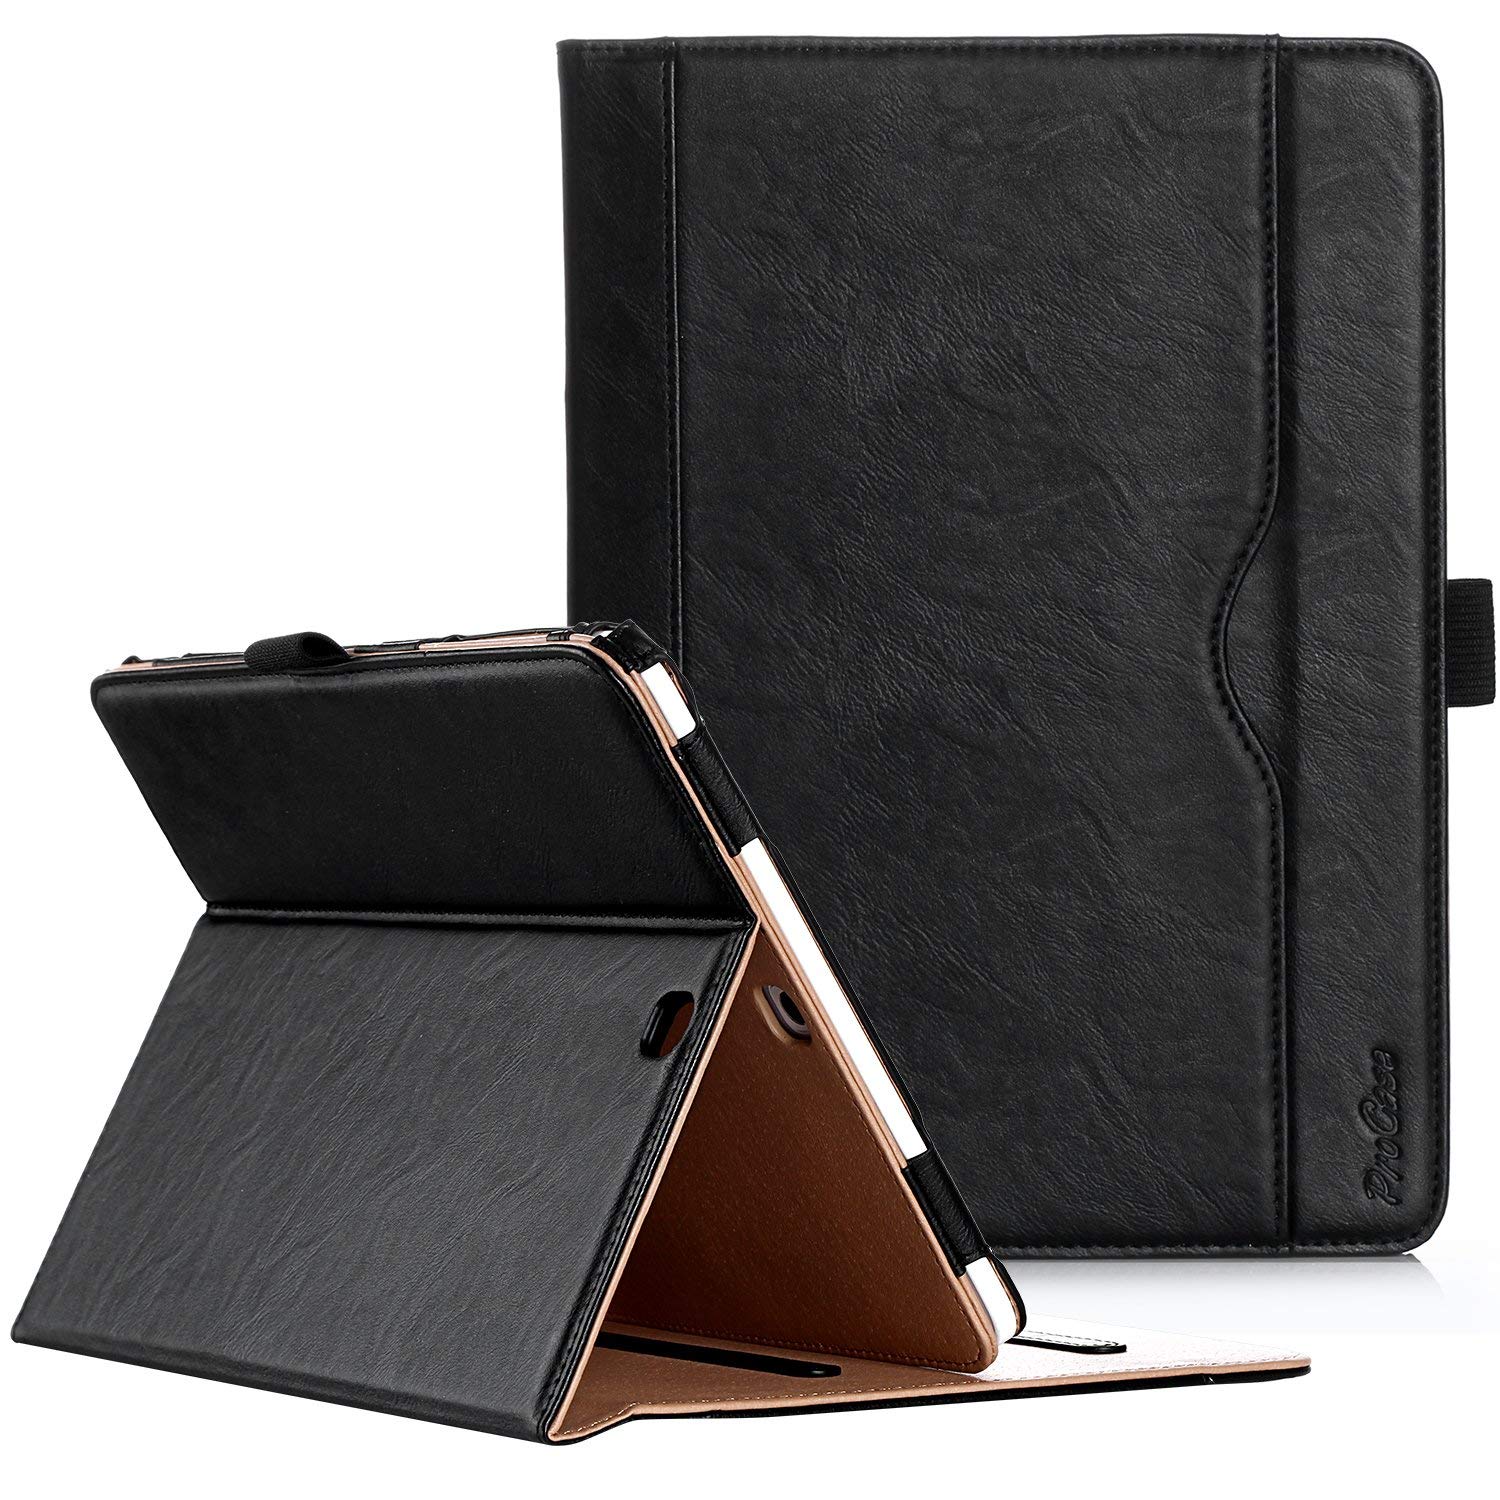 ProCase Marca: Samsung Galaxy Tab S2 9.7 Case - Leather Stand Folio Case Cover for Galaxy Tab S2 Tablet (9.7 inch, SM-T810 T815 T813) -Color: Negro.